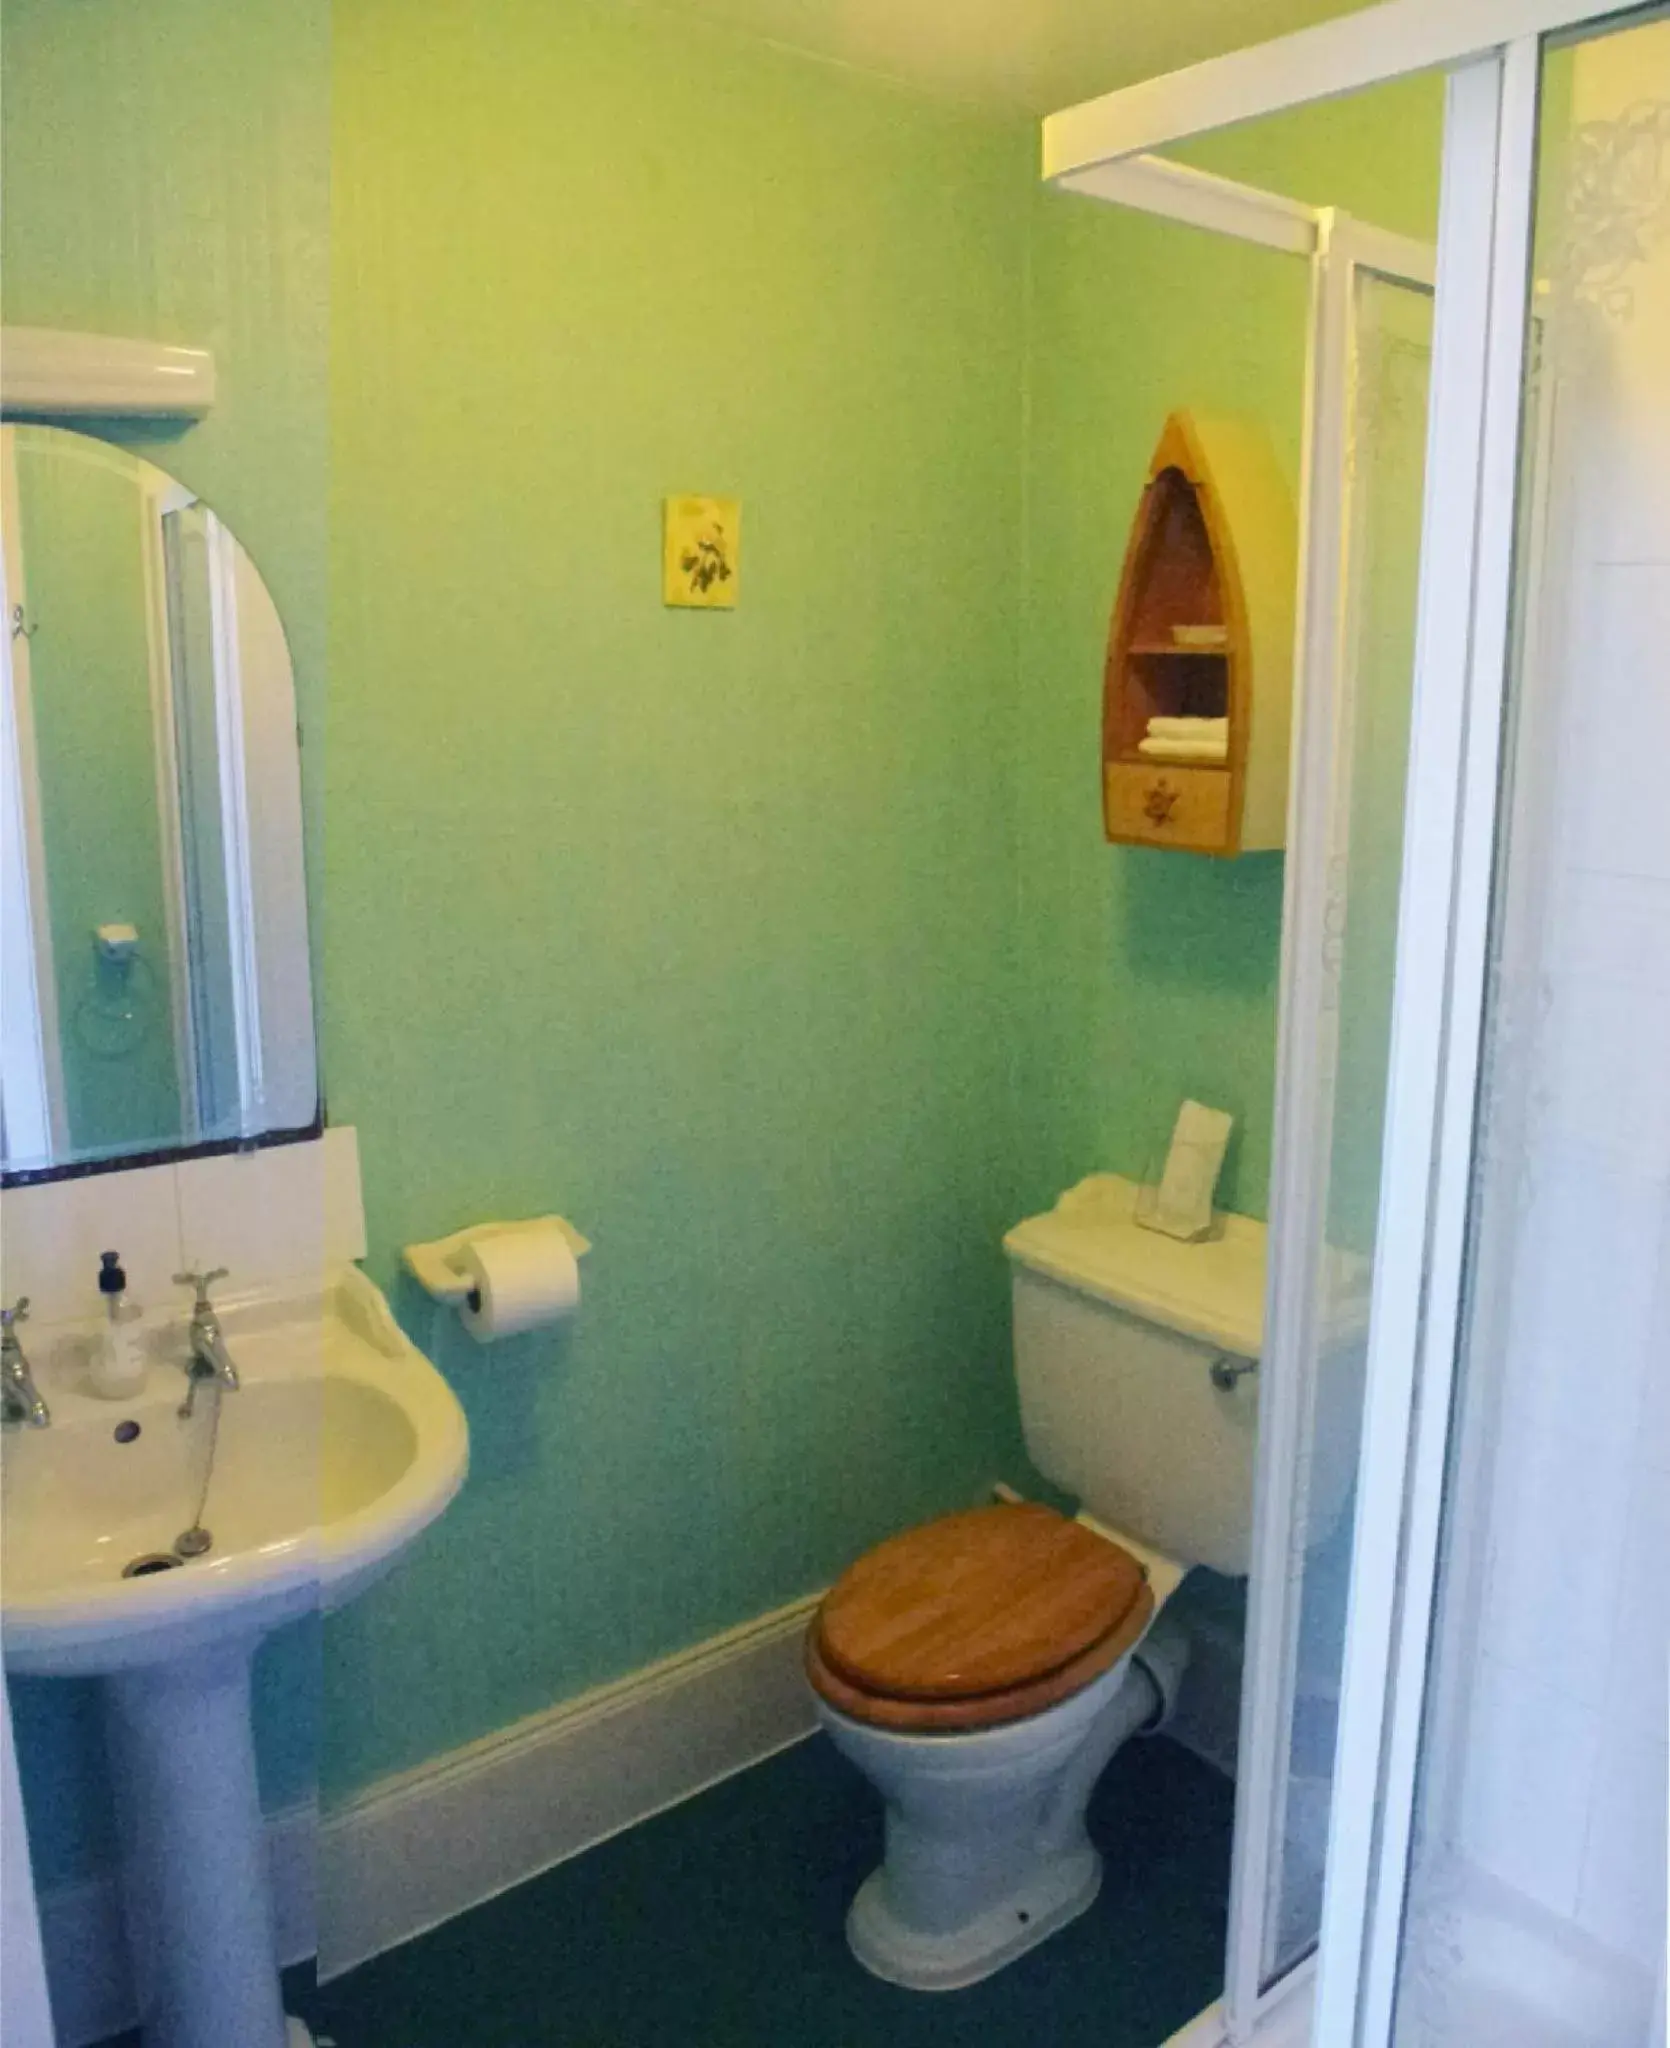 Bathroom in The Old Rectory